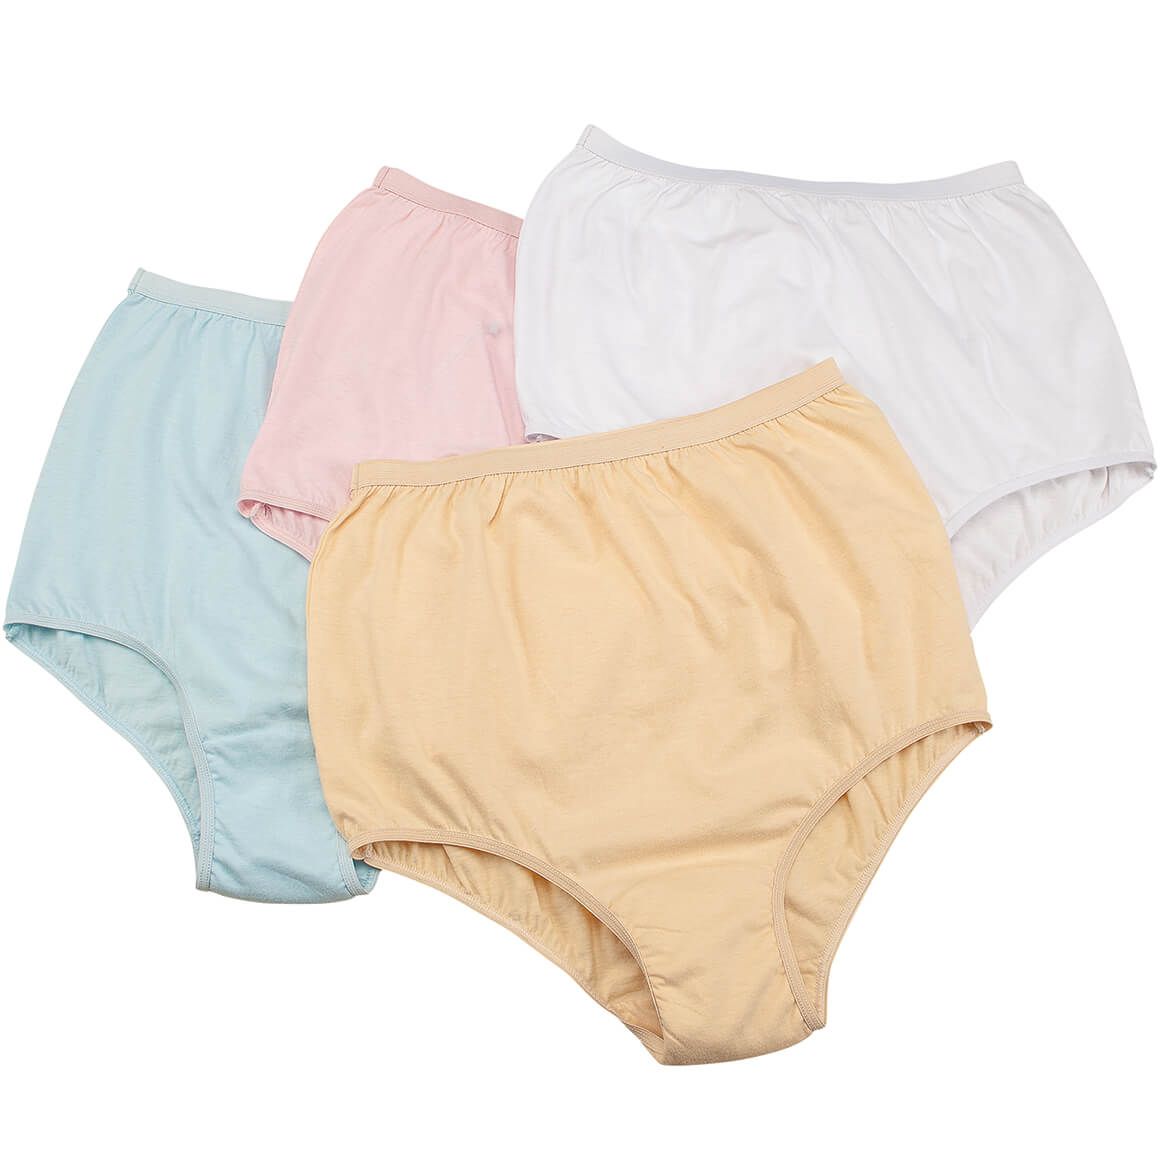 Easy Comforts Style™ Classic Cotton Briefs, 4 Pack + '-' + 364814